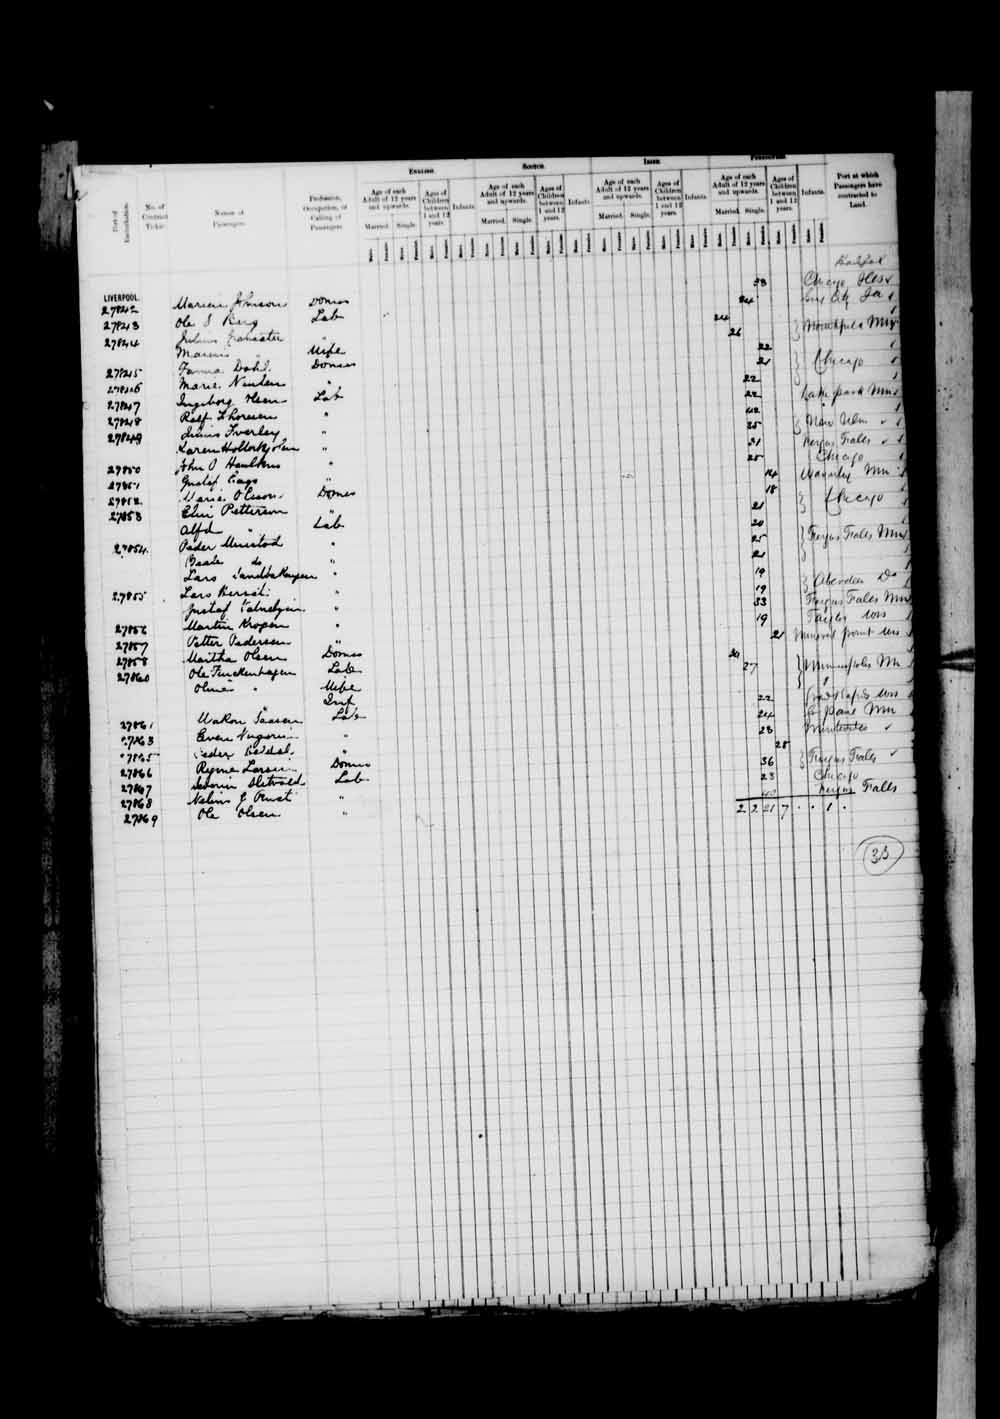 Digitized page of Passenger Lists for Image No.: e003674936